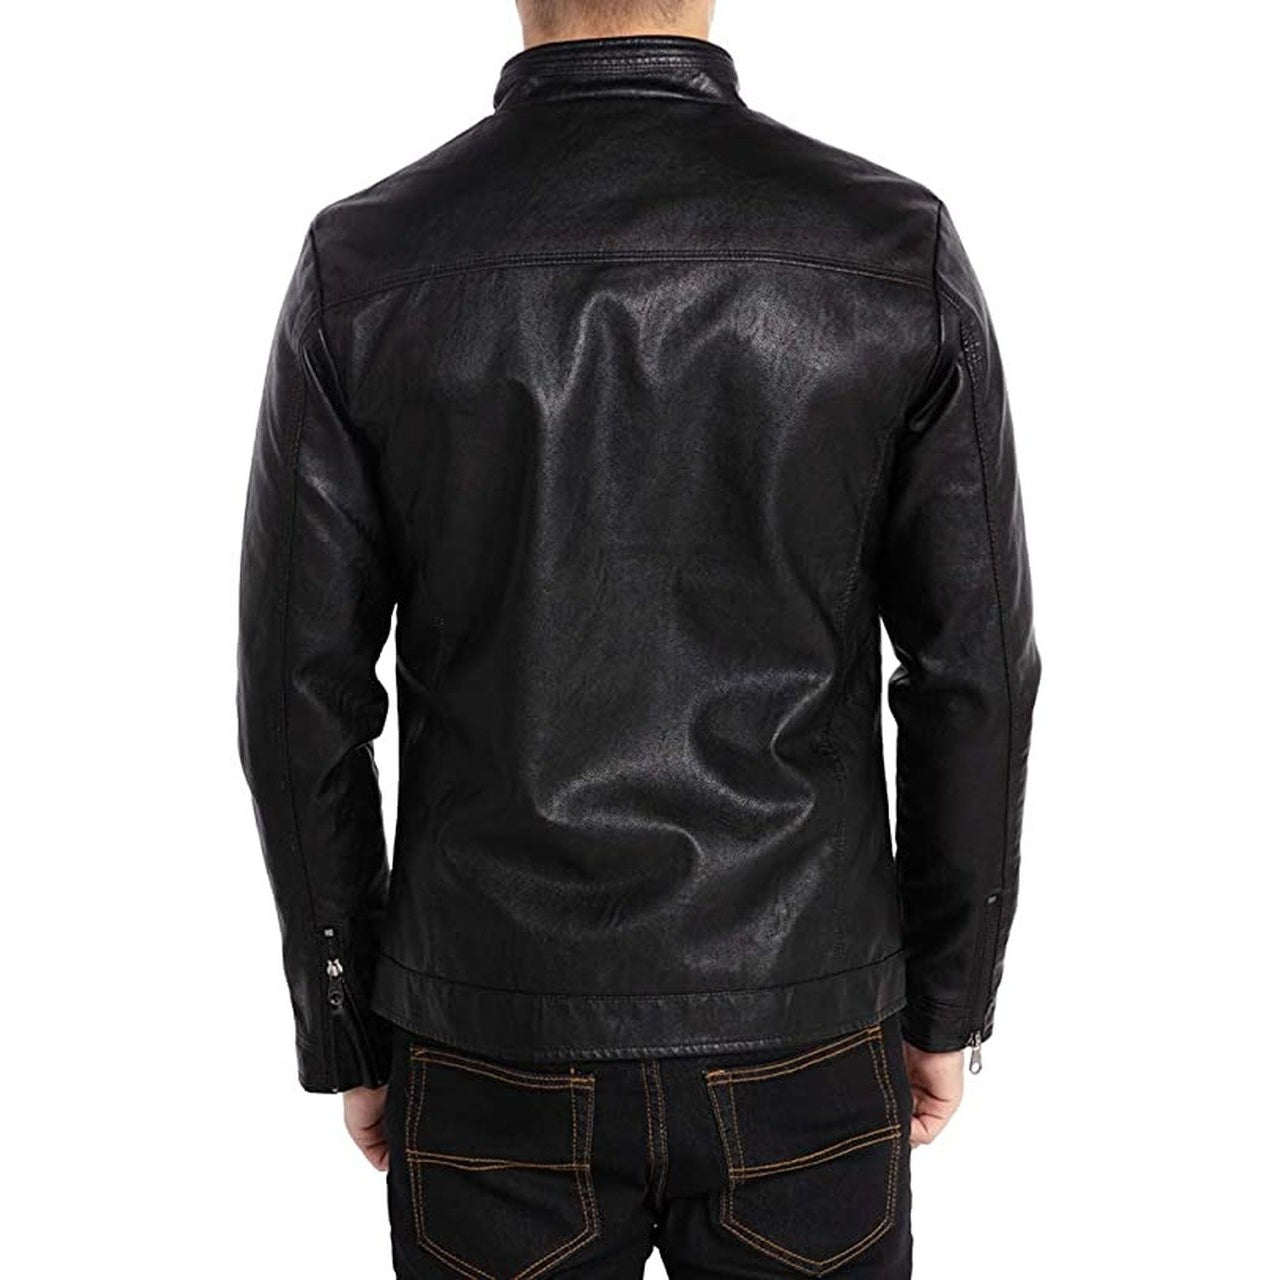 Men Stand Collar Leather Motorcycle Jacket Outwear Black - Leather Jacket